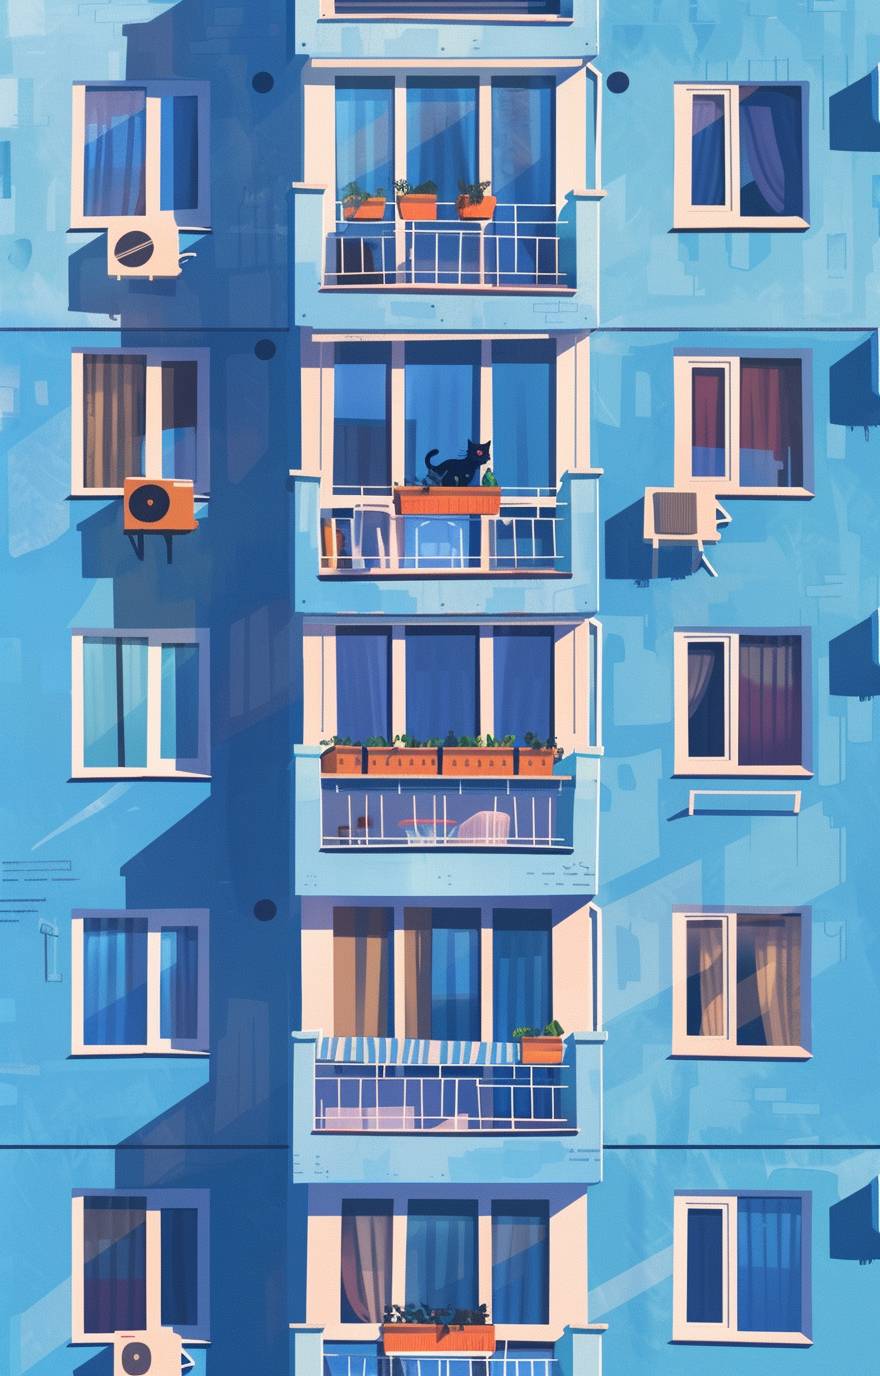 A flat deep blue building with many windows and balconies, each window has different colors and designs. There is a black cat on the balcony, in the style of Wes Anderson. Retro poster style with pastel tones, symmetrical composition, sun rays and shadows. Detailed architecture in an architectural photography cityscape with a minimalist, vintage style using pastels and soft lighting. High resolution with sharp focus on intricate details, creating a vibrant, lively and happy atmosphere.